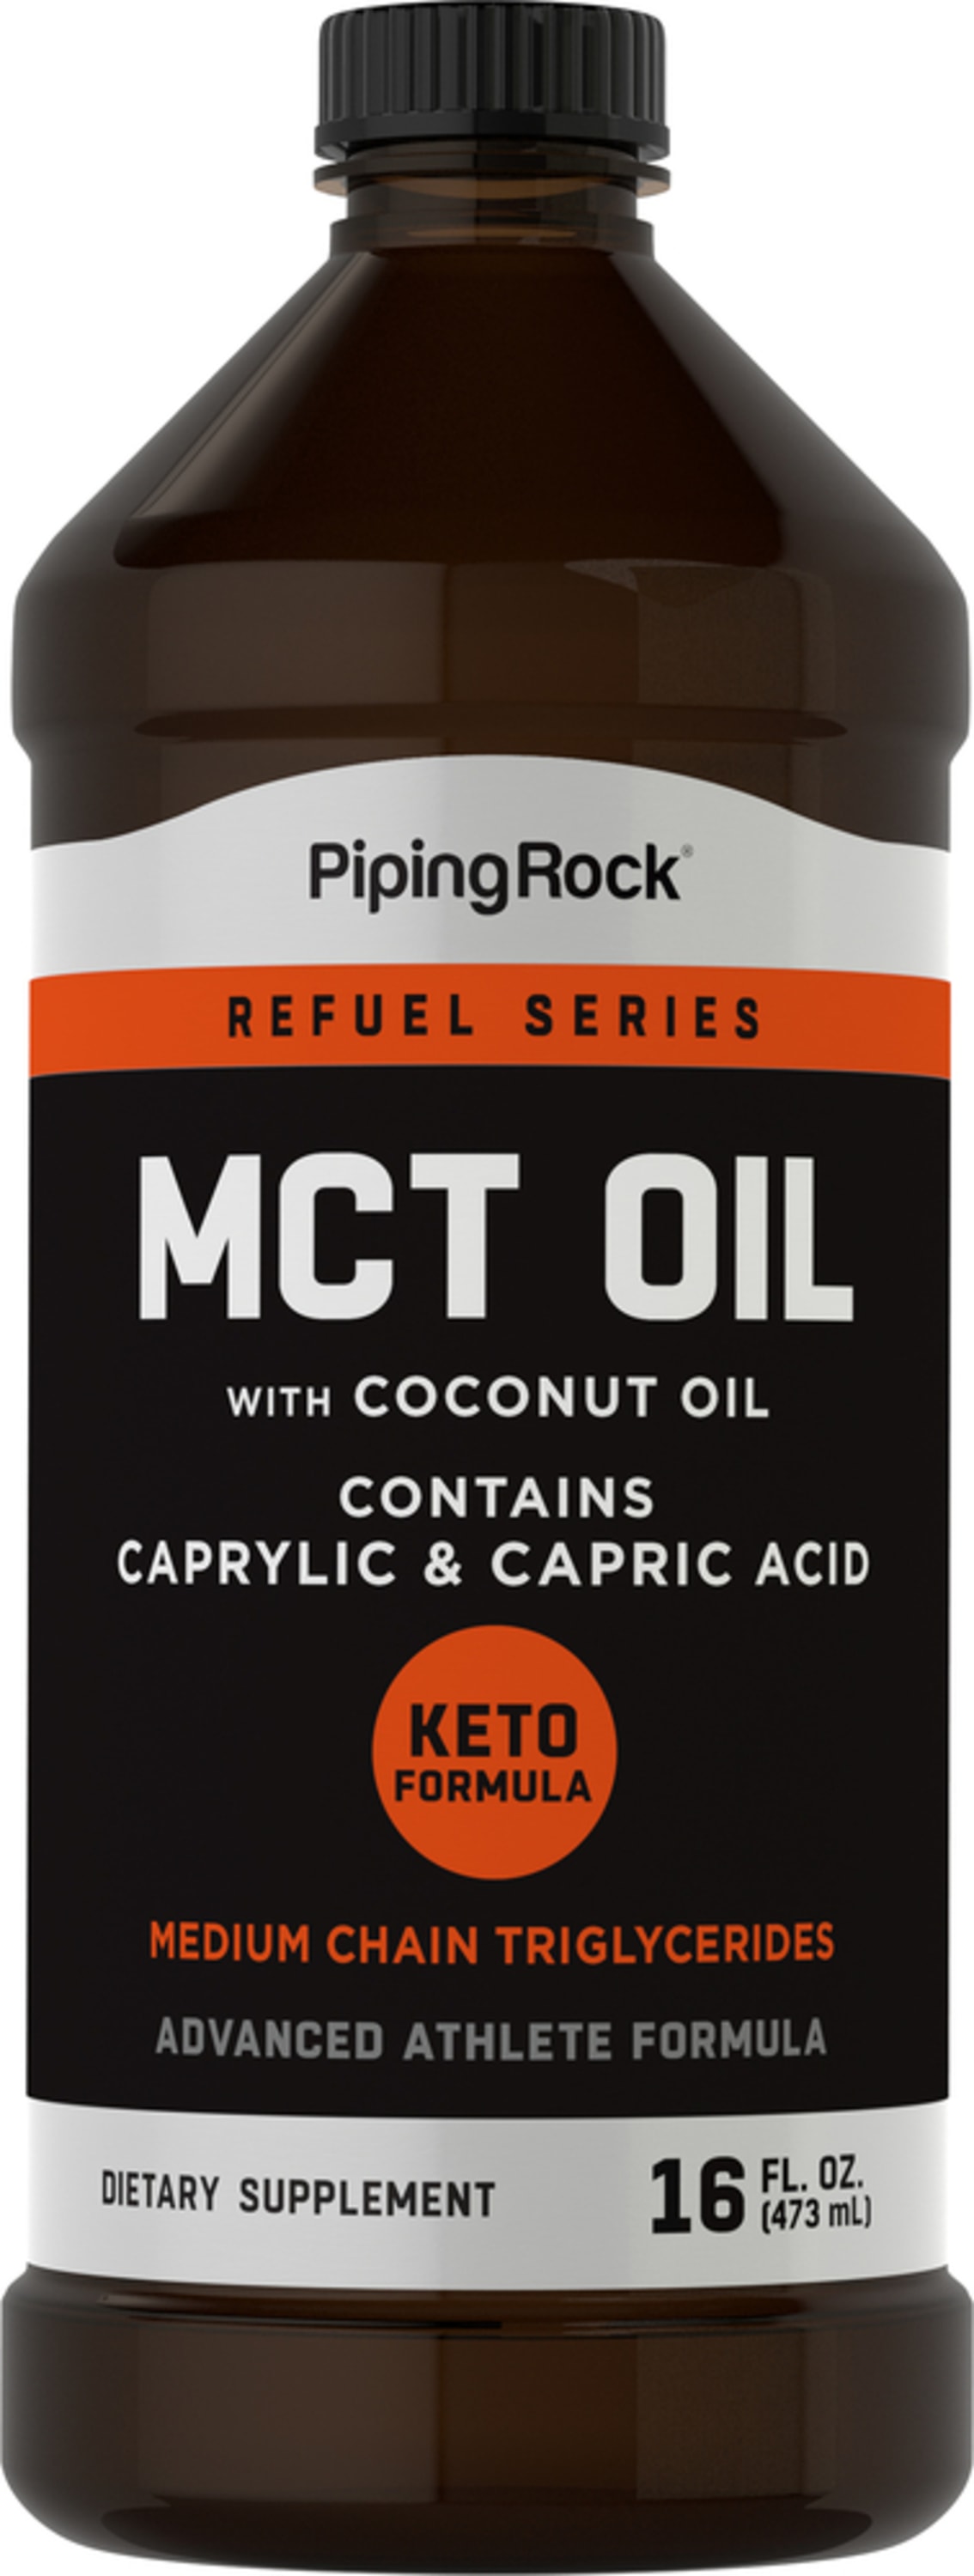 MCT Oil (Medium Chain Triglycerides) with Coconut Oil, 16 fl oz (473 mL)  Bottle | PipingRock Health Products